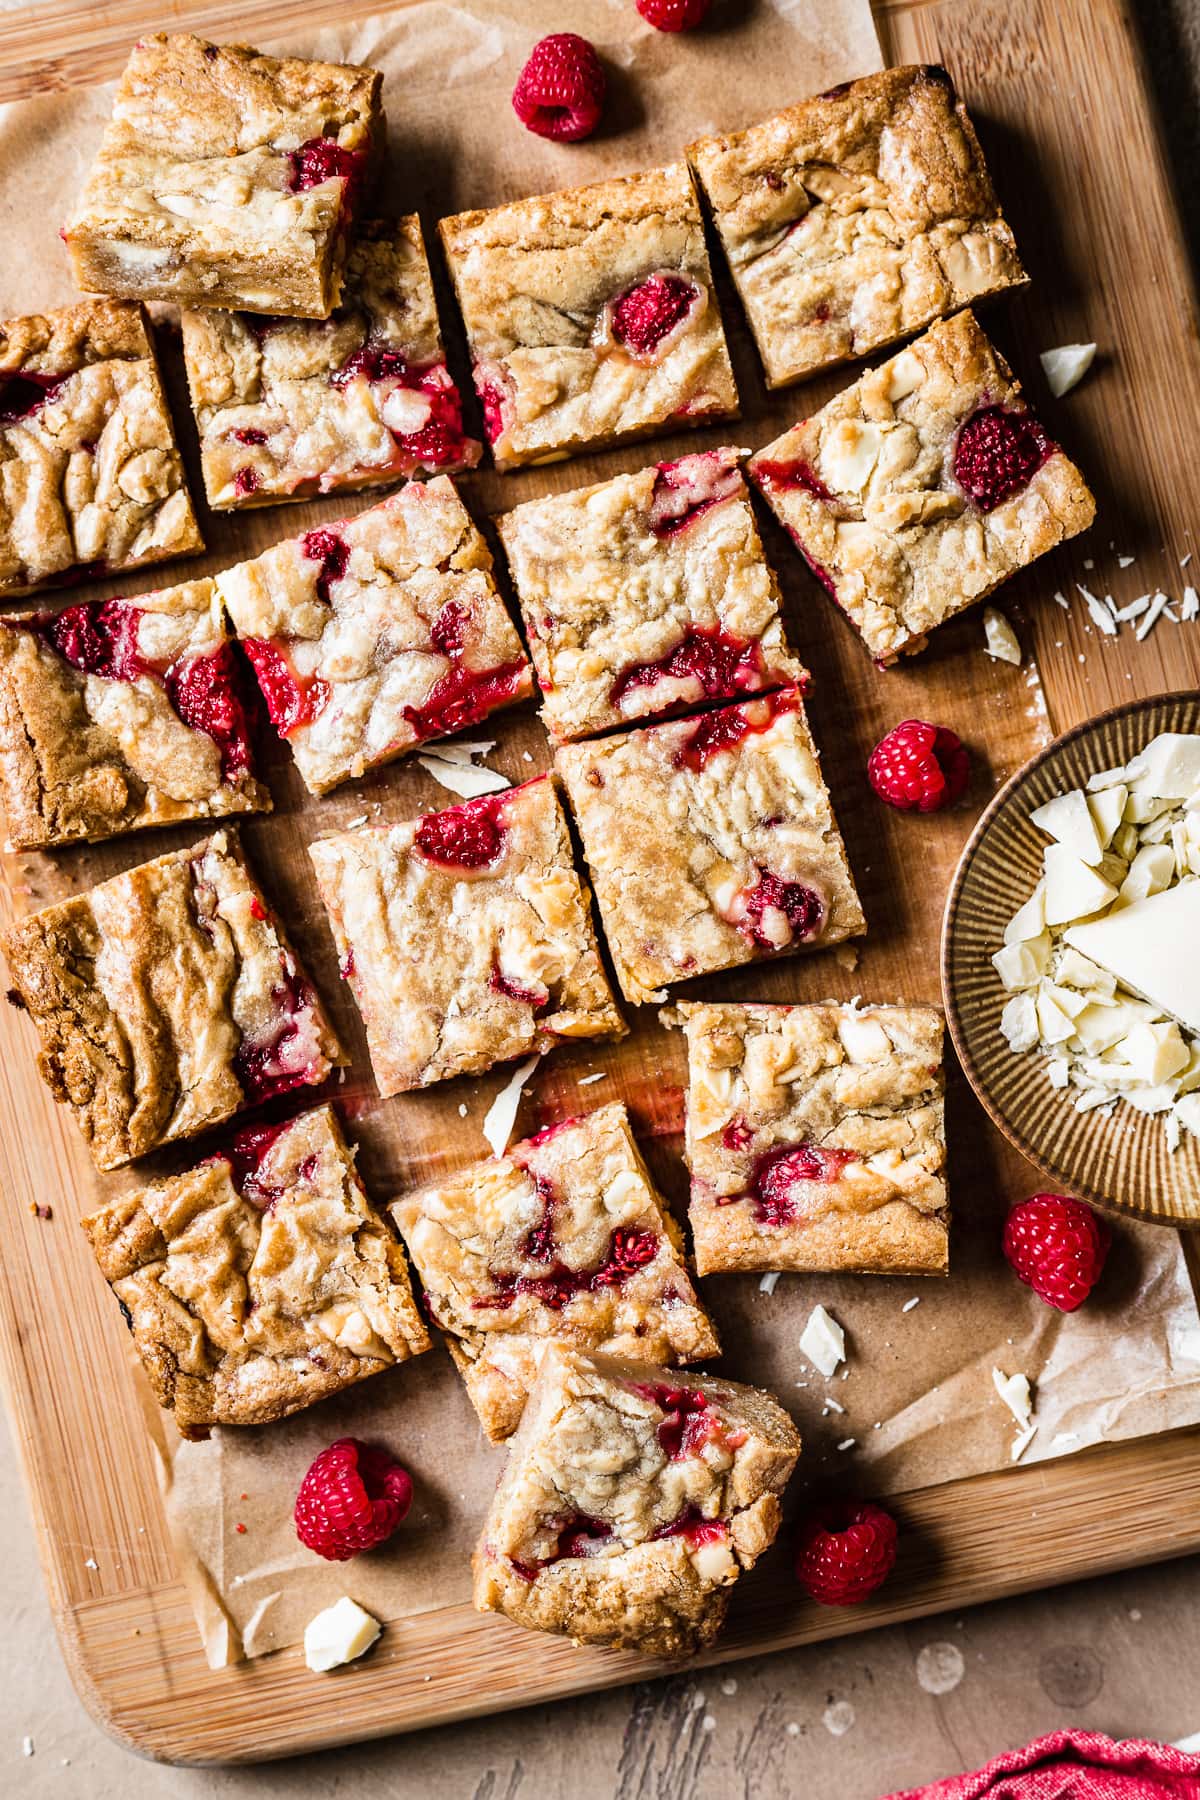 Raspberry and white chocolate stuffed bar cookies cut into squares on a wooden cutting board. Raspberries and white chocolate peek in from the edge of the image.